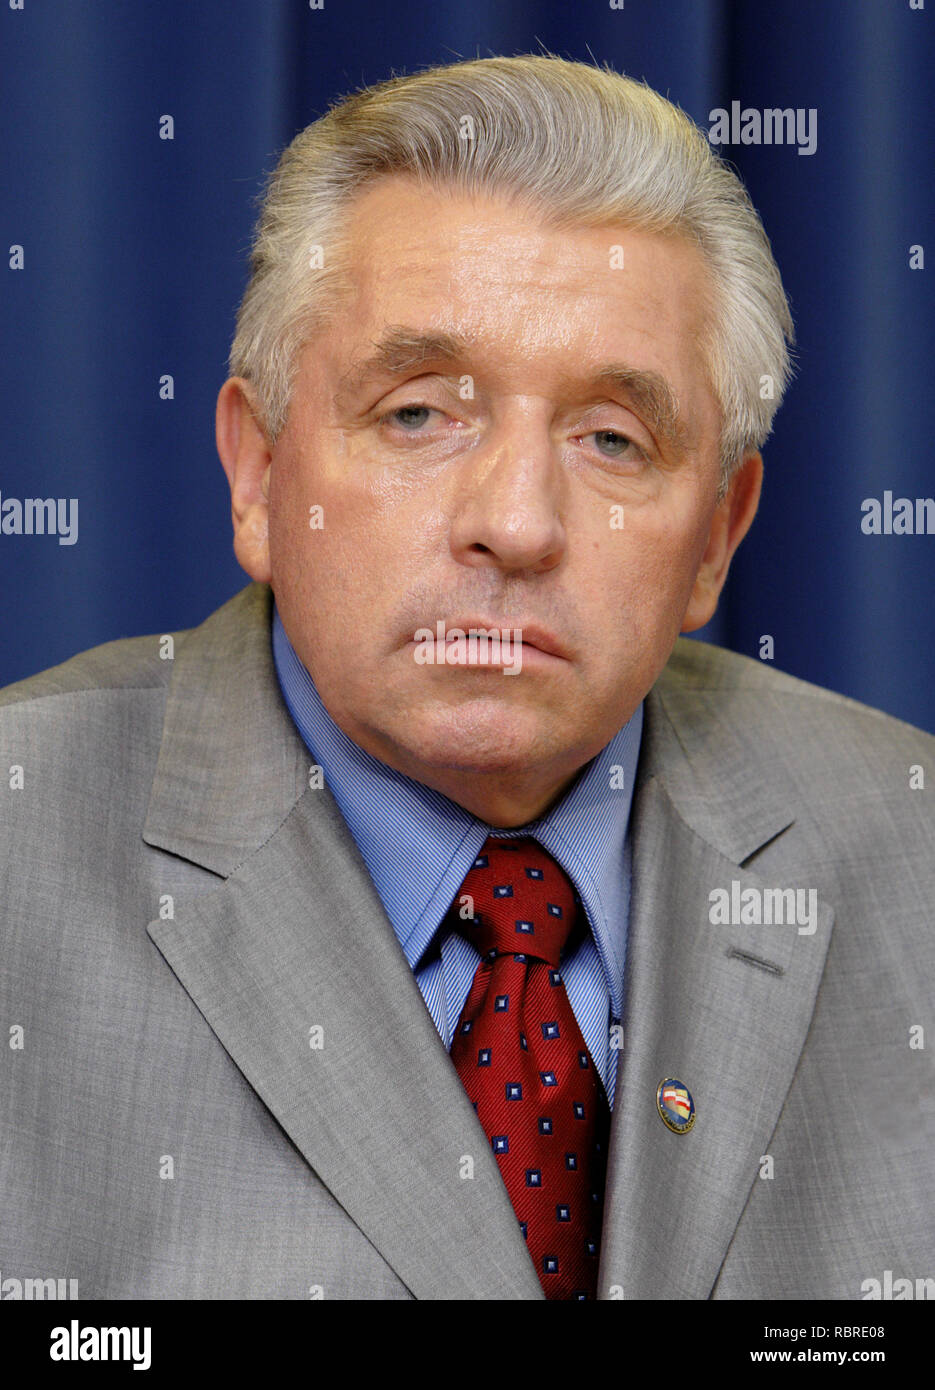 Warsaw, Mazovia / Poland - 2006/08/01: Andrzej Lepper - deputy Prime Minister and Minister of Agriculture and Self Defence Samoobrona party leader in  Stock Photo